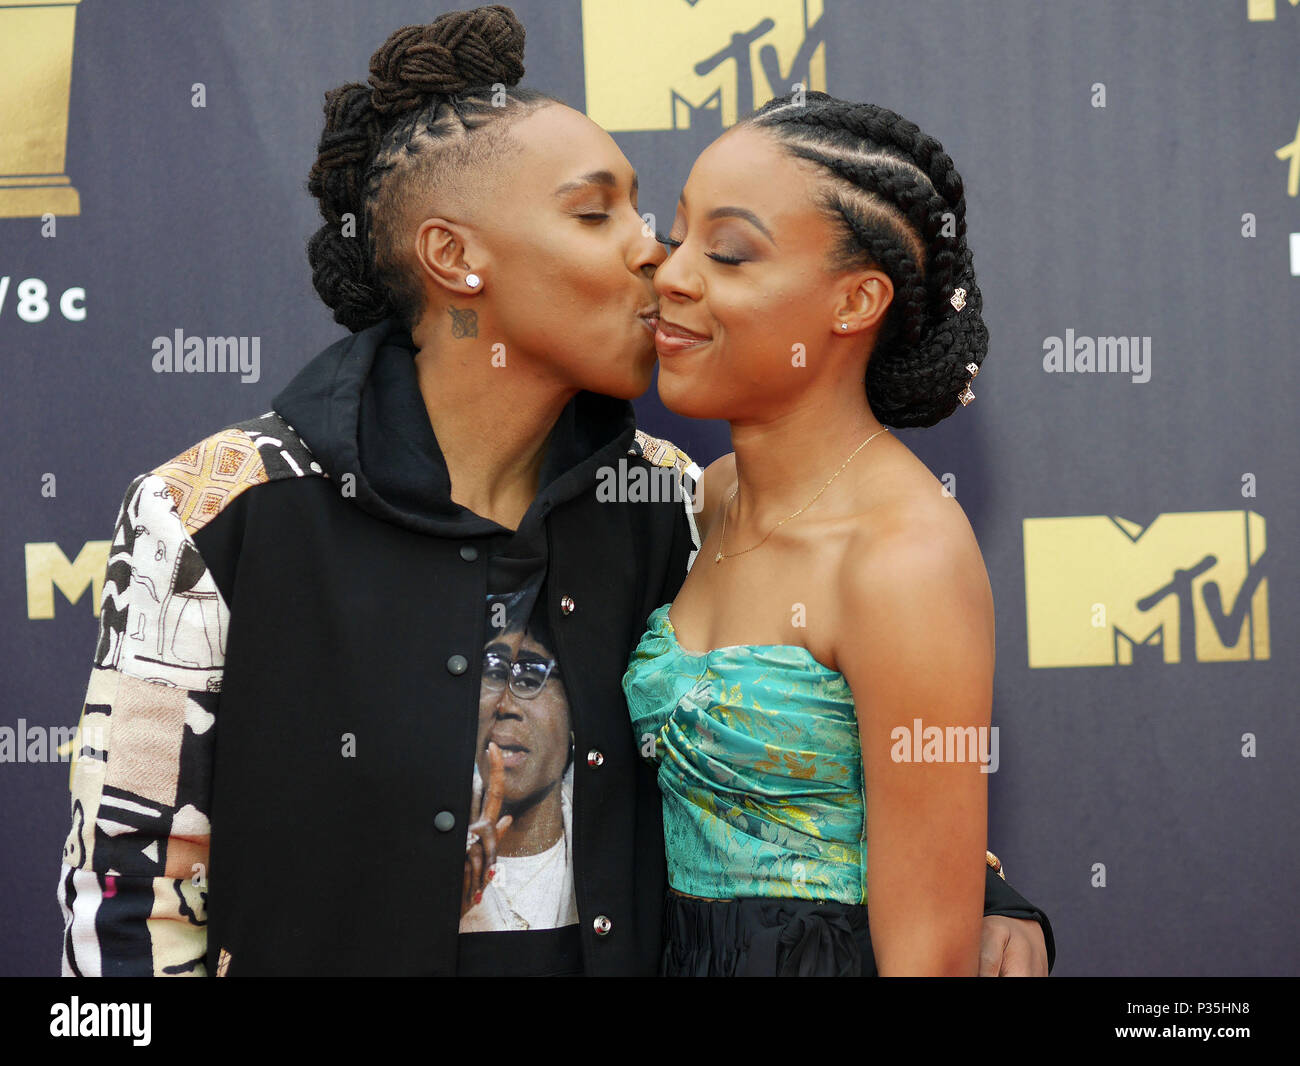 Lena Waithe, left, and her girlfriend, Alana Mayo attending the 2018 MTV Movie and TV Awards held at the Barker Hangar in Los Angeles, USA. Stock Photo